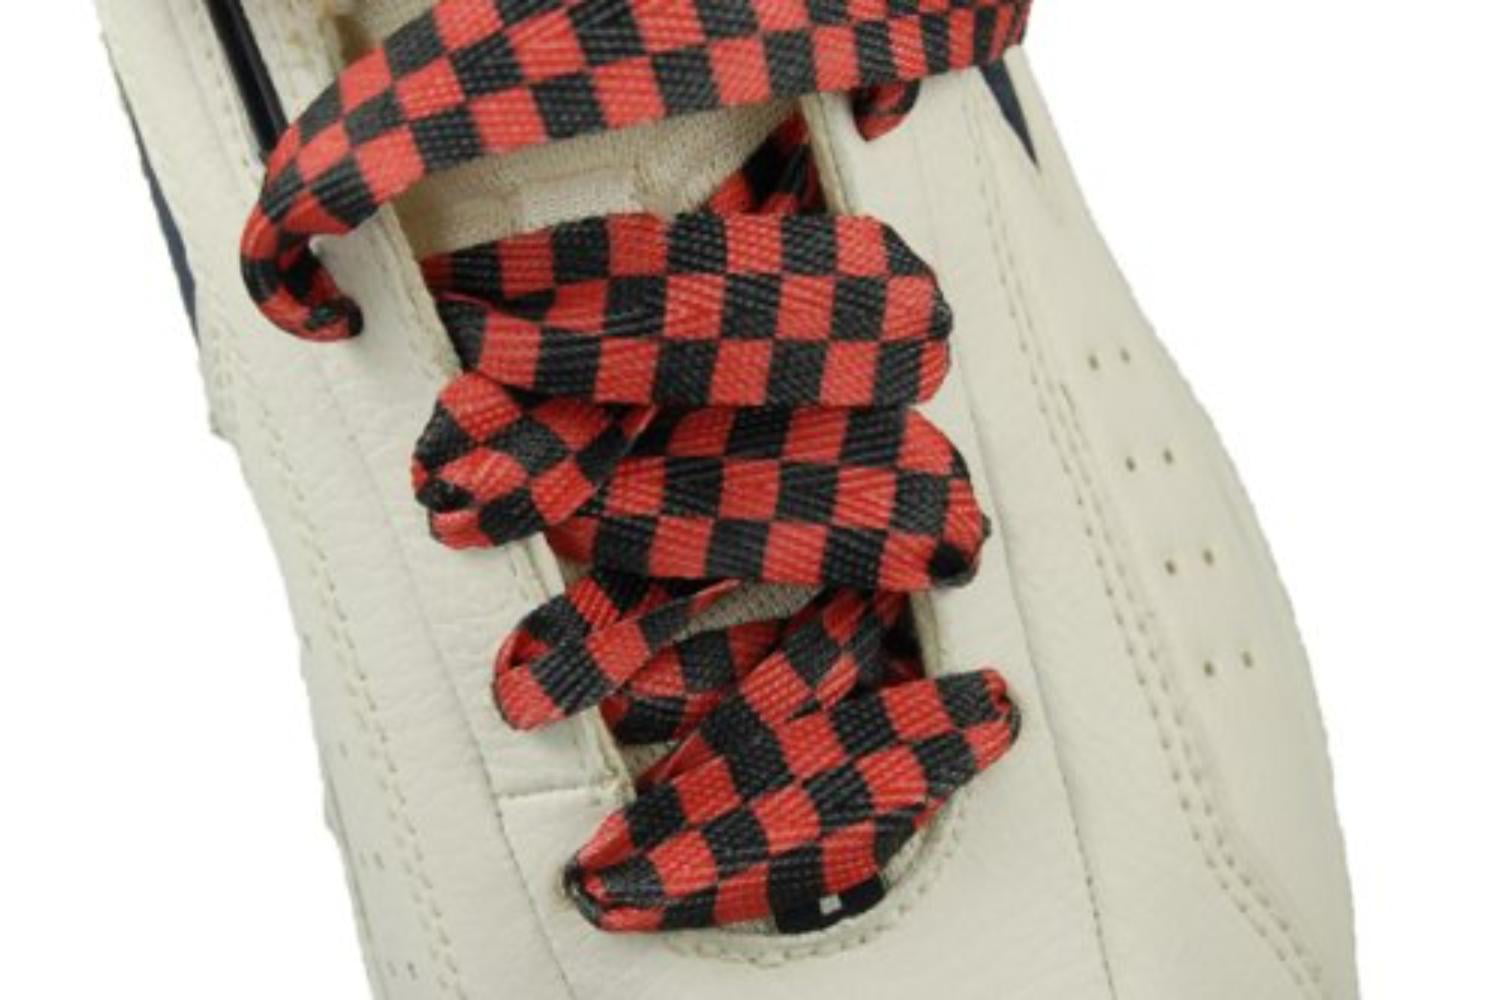 Eyelets Sneakers Shoelace One Pair Fashion Flat Shoelaces "Checker" 6 pr 